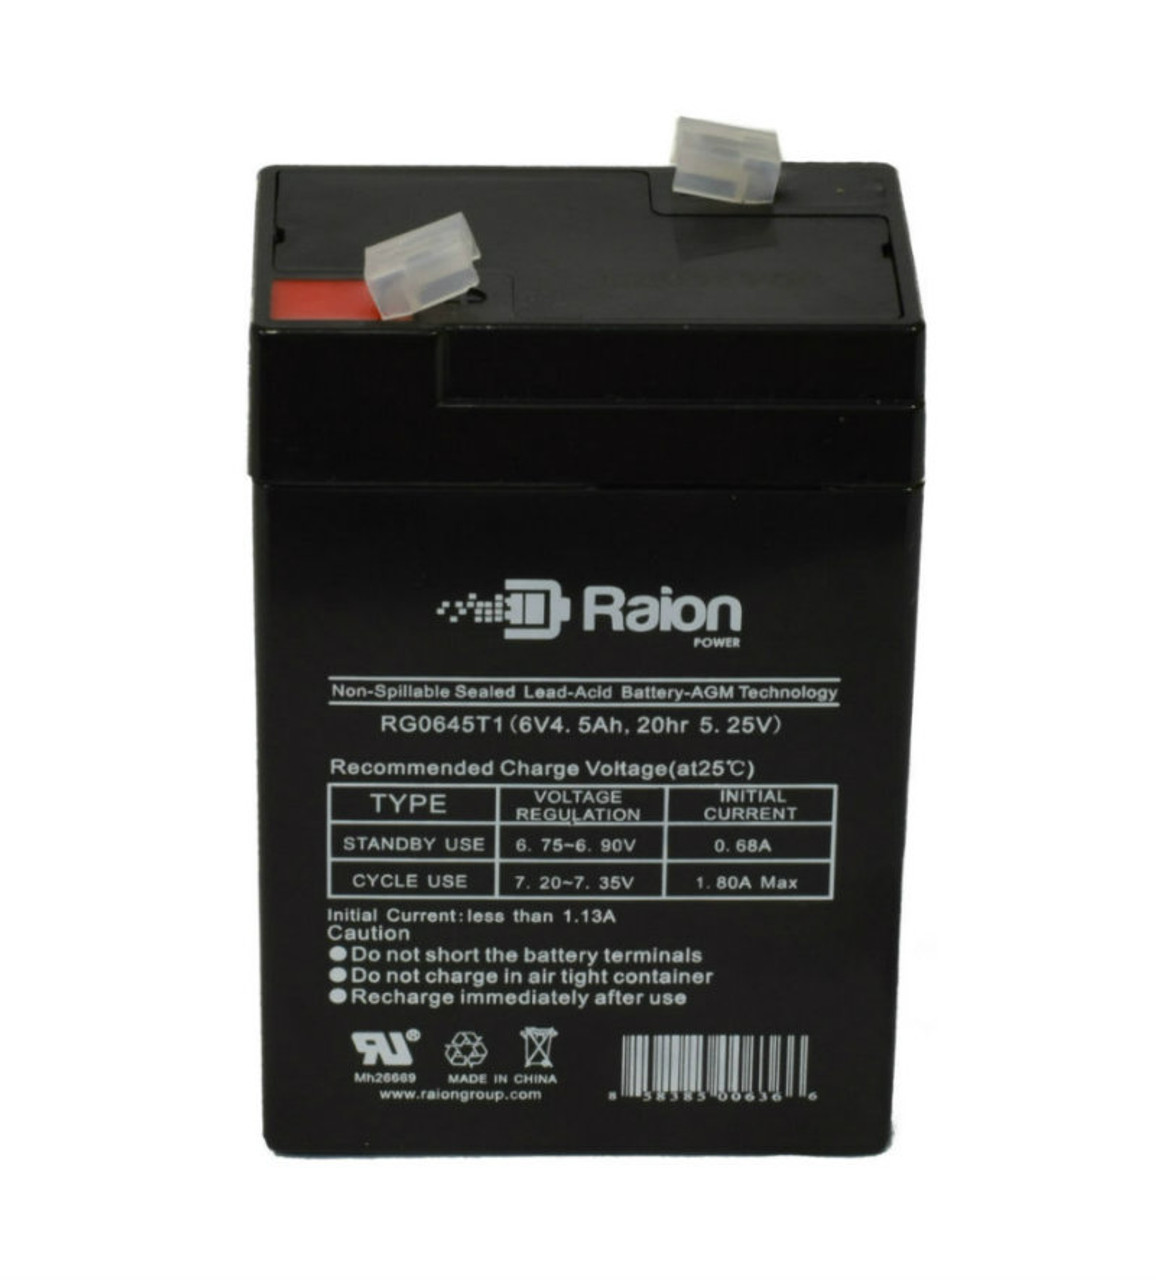 Raion Power RG0645T1 Replacement Battery Cartridge for Peg Perego 6V Energy Cube Type C